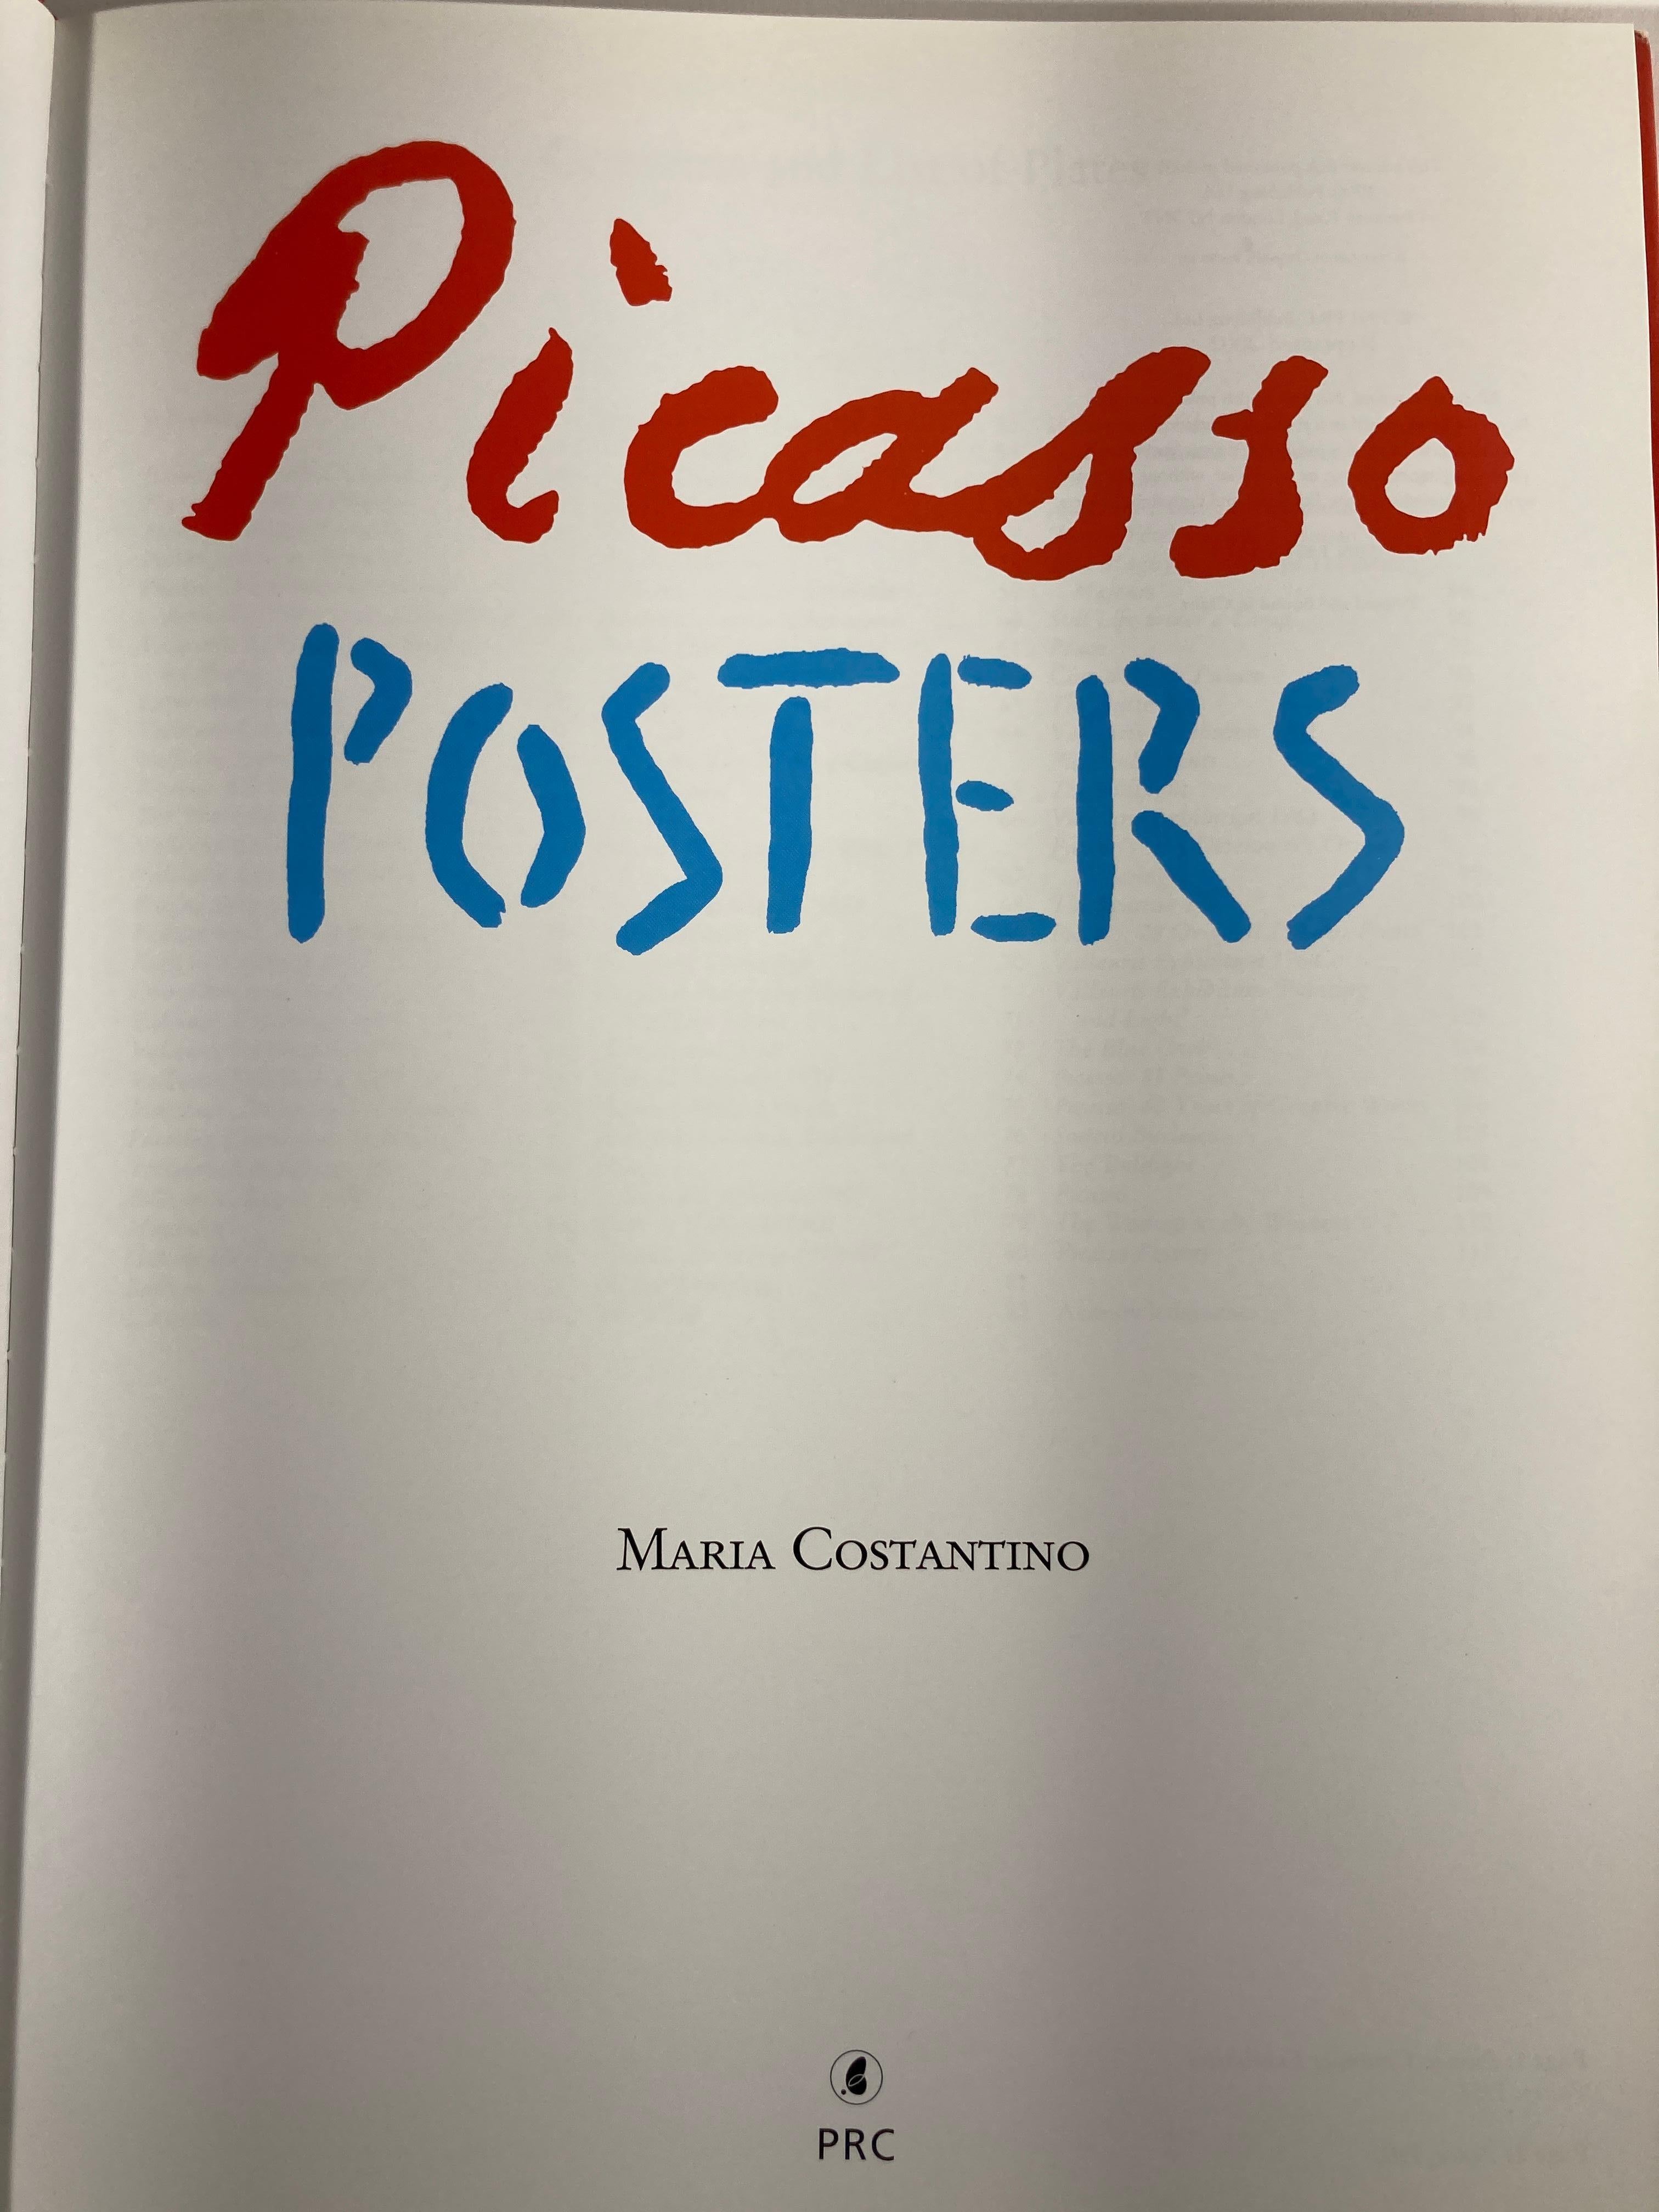 Paper 'Picasso Posters' Cubism Red Pablo Picasso Large Hardcover Art Book